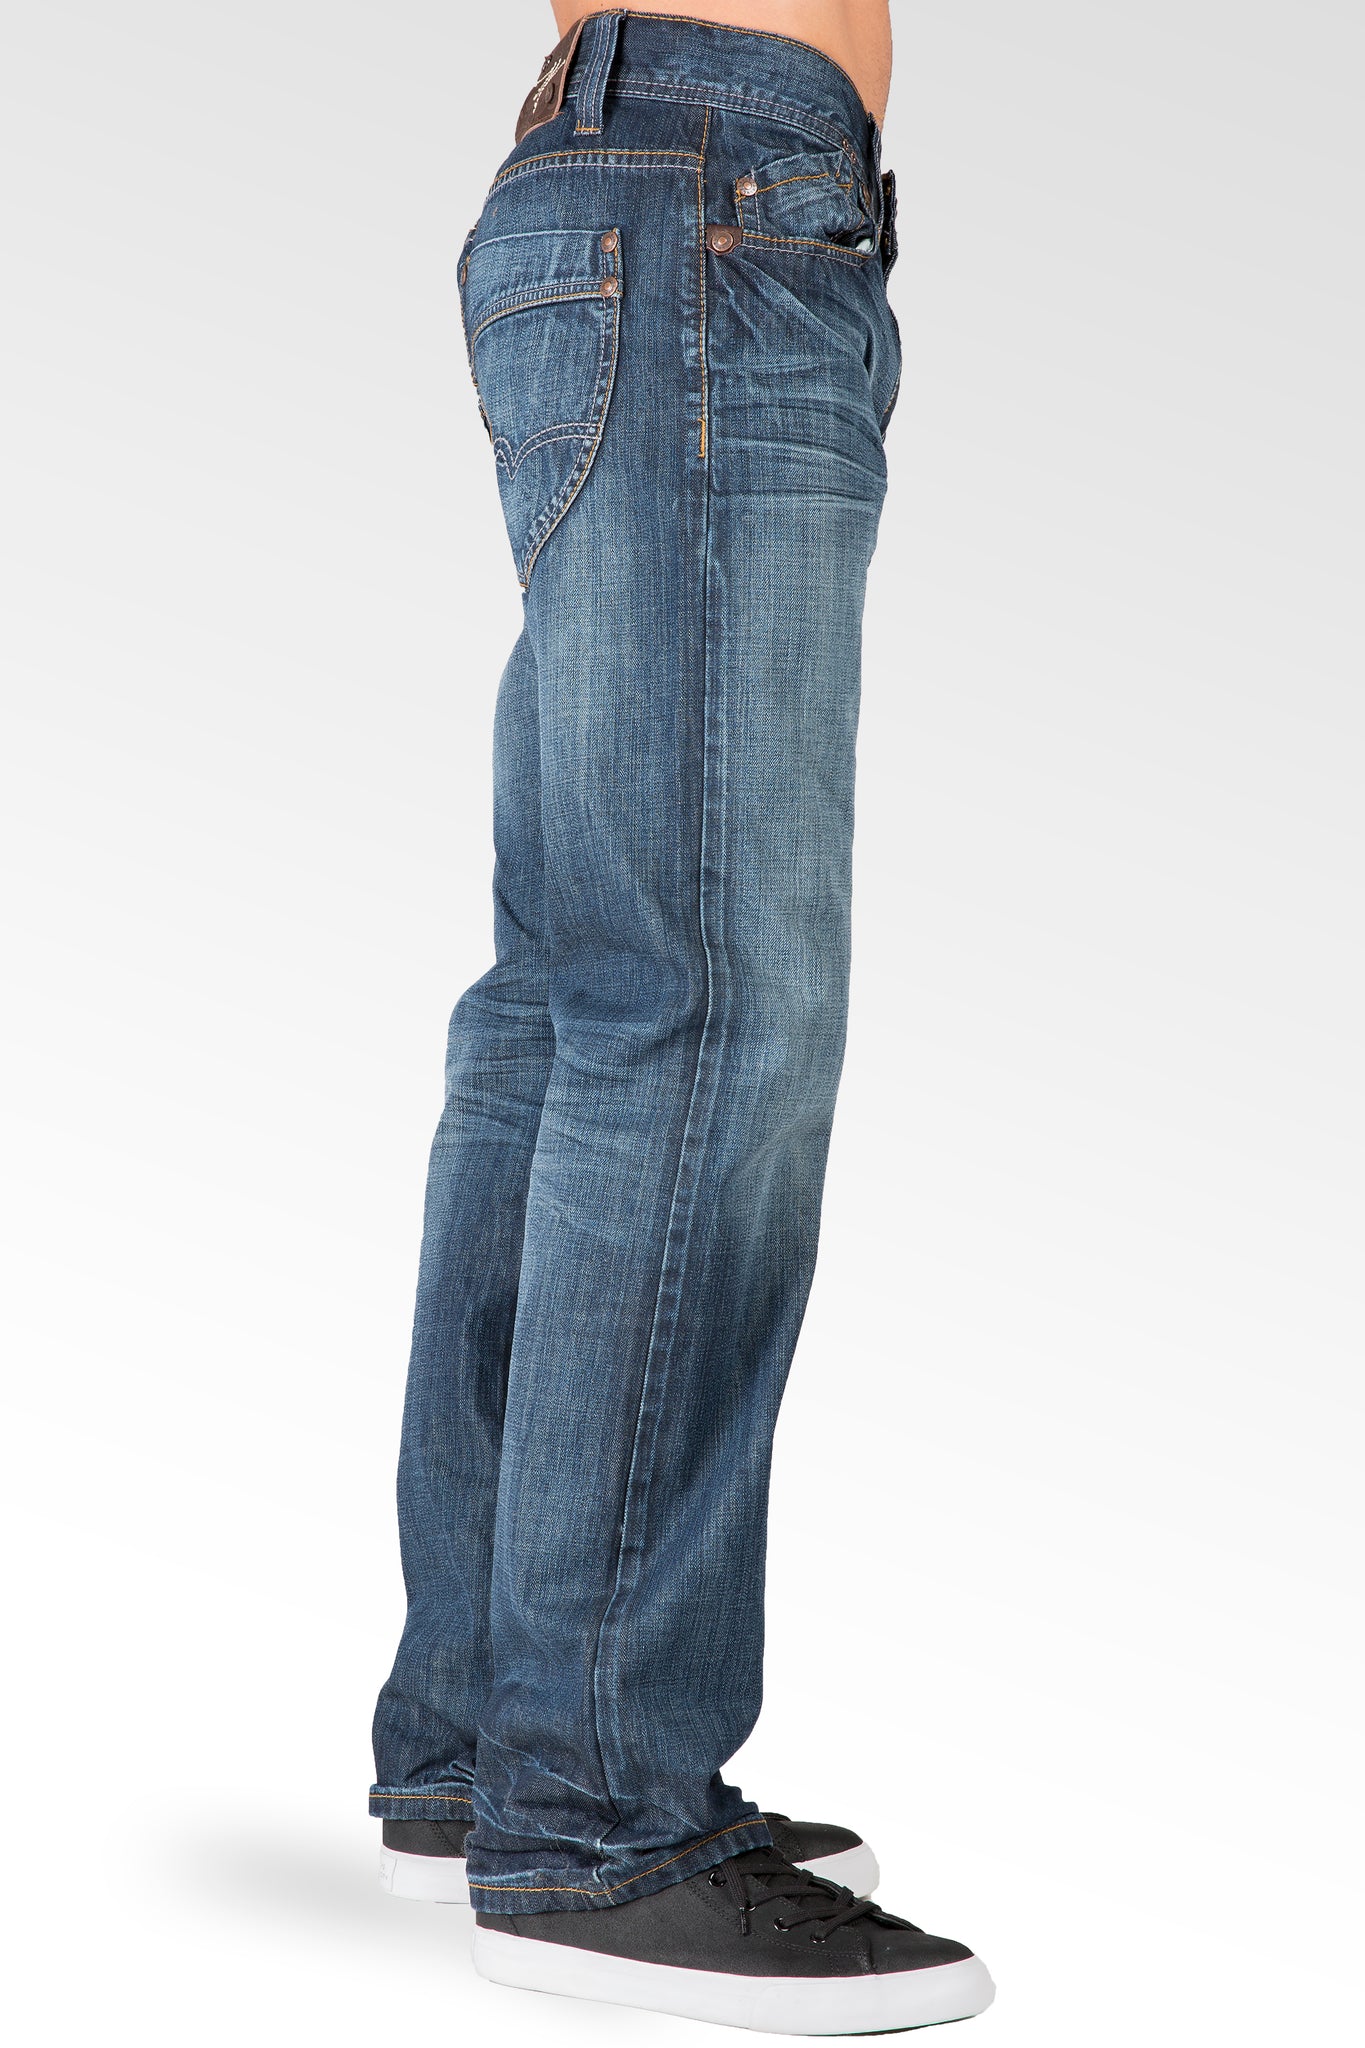 Hand Sanded Blue Relaxed Straight Fit Premium Denim Jeans Whiskering